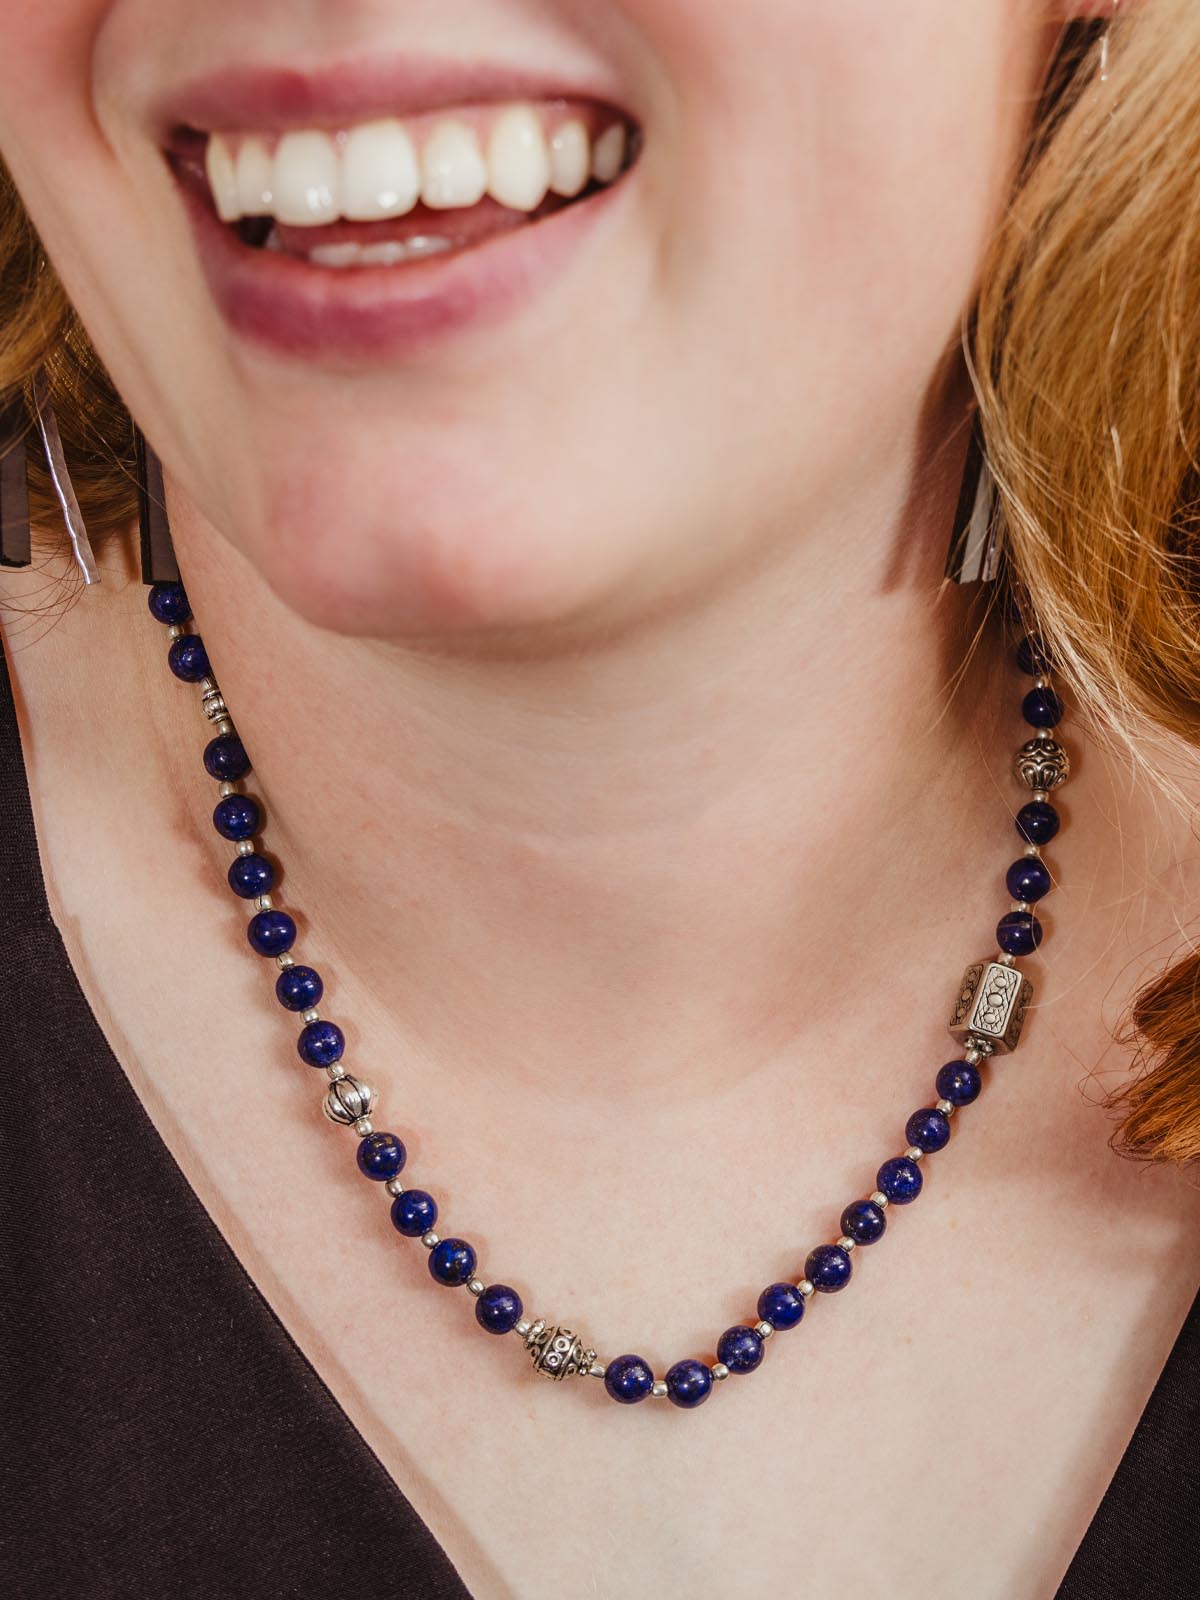 Female model wearing blue and silver beaded necklace